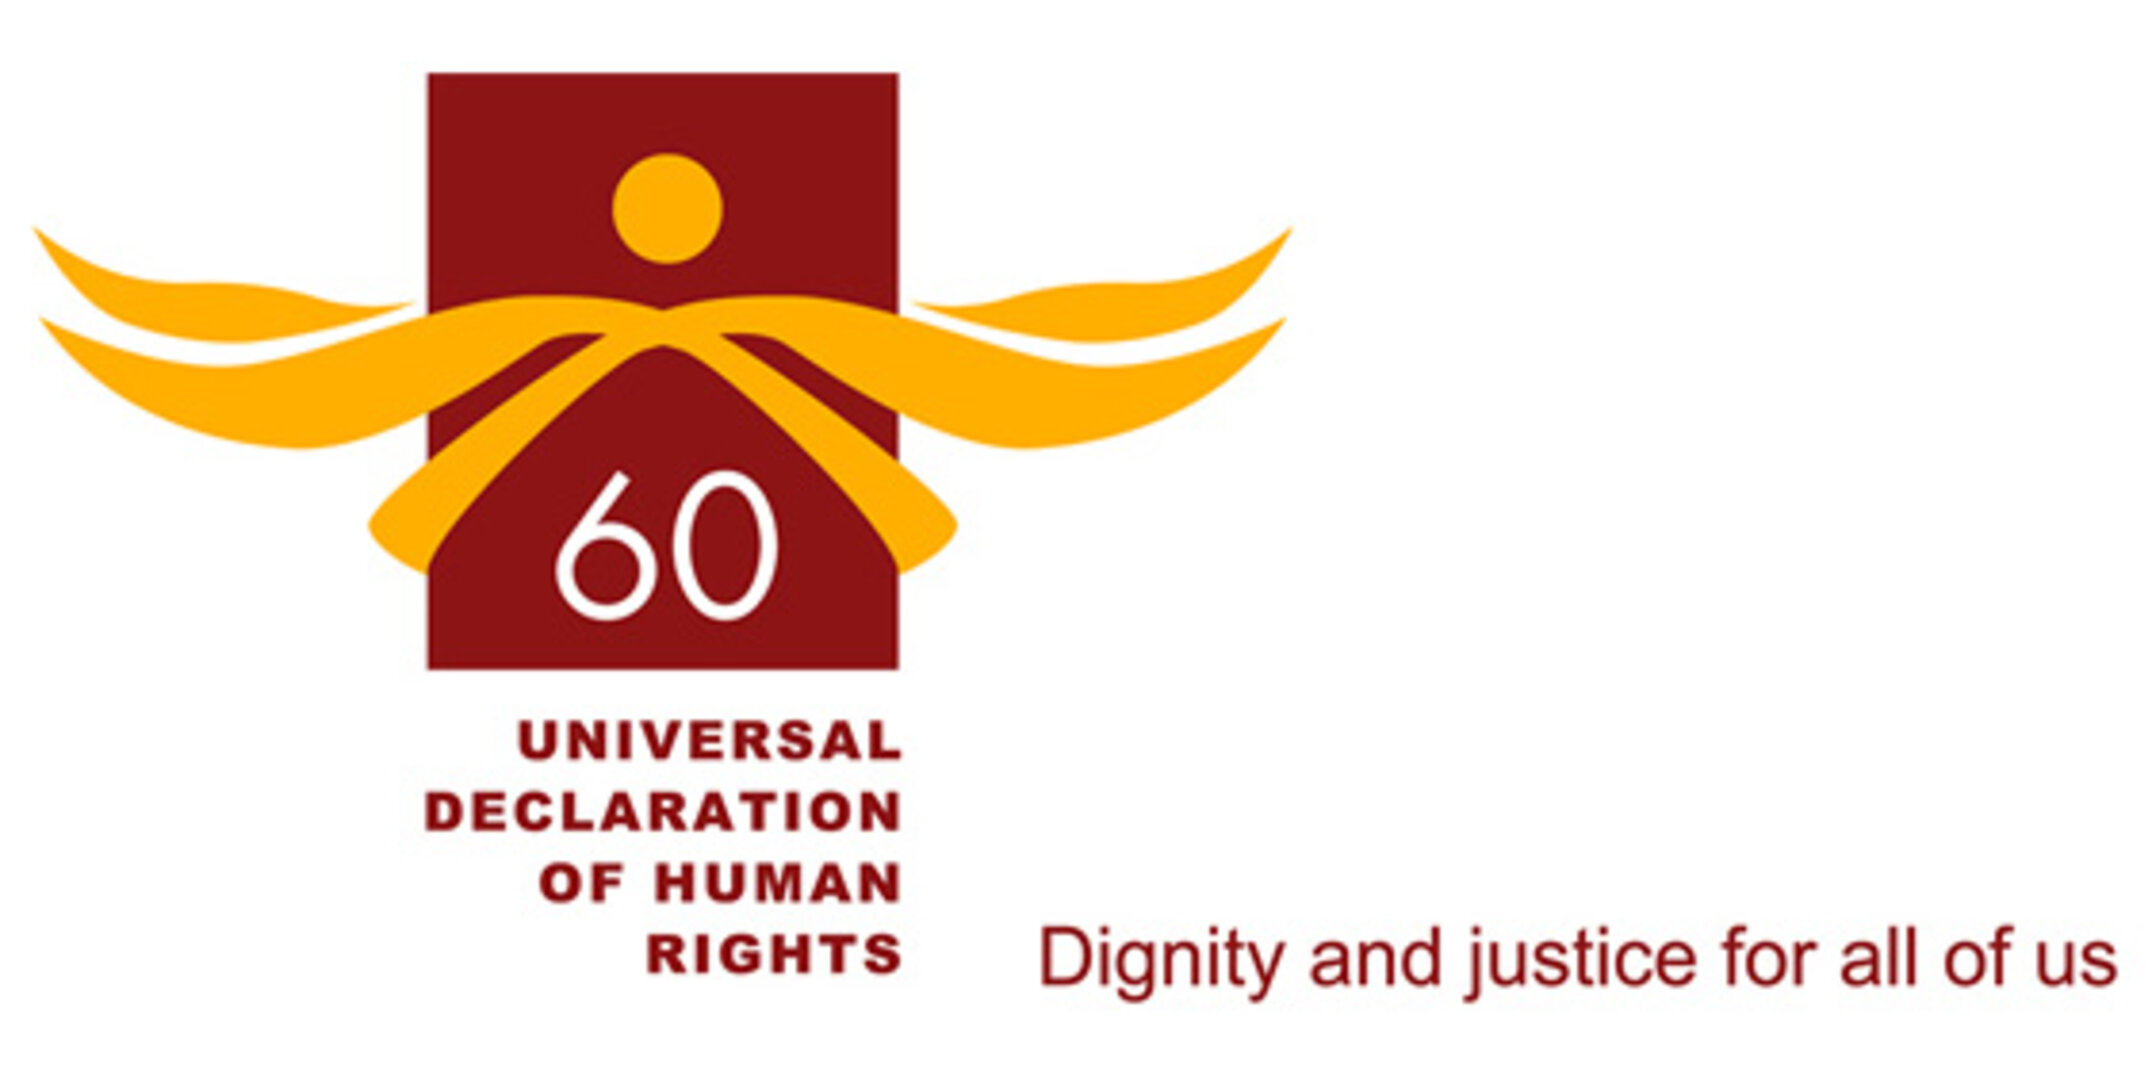 The Universal Declaration of Human Rights (UDHR) turns 60 on 10 December 2008